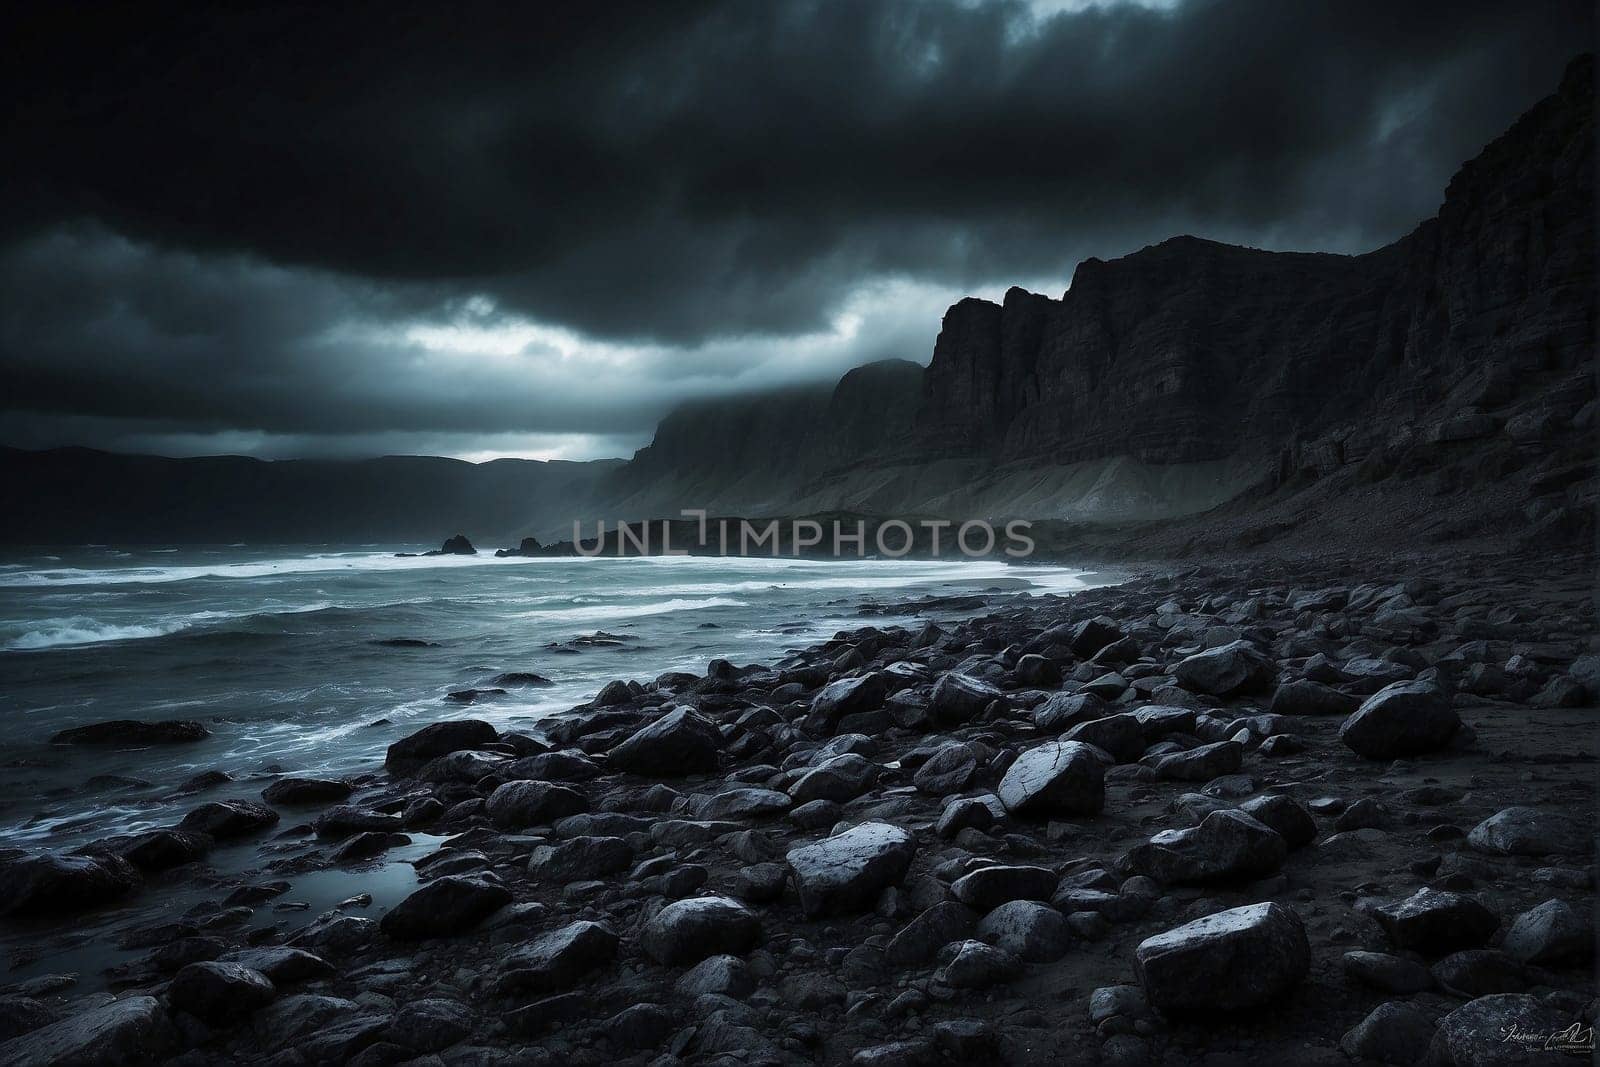 This black and white photograph captures the stark contrast of a rocky beach, showcasing the rugged terrain meeting the crashing waves.